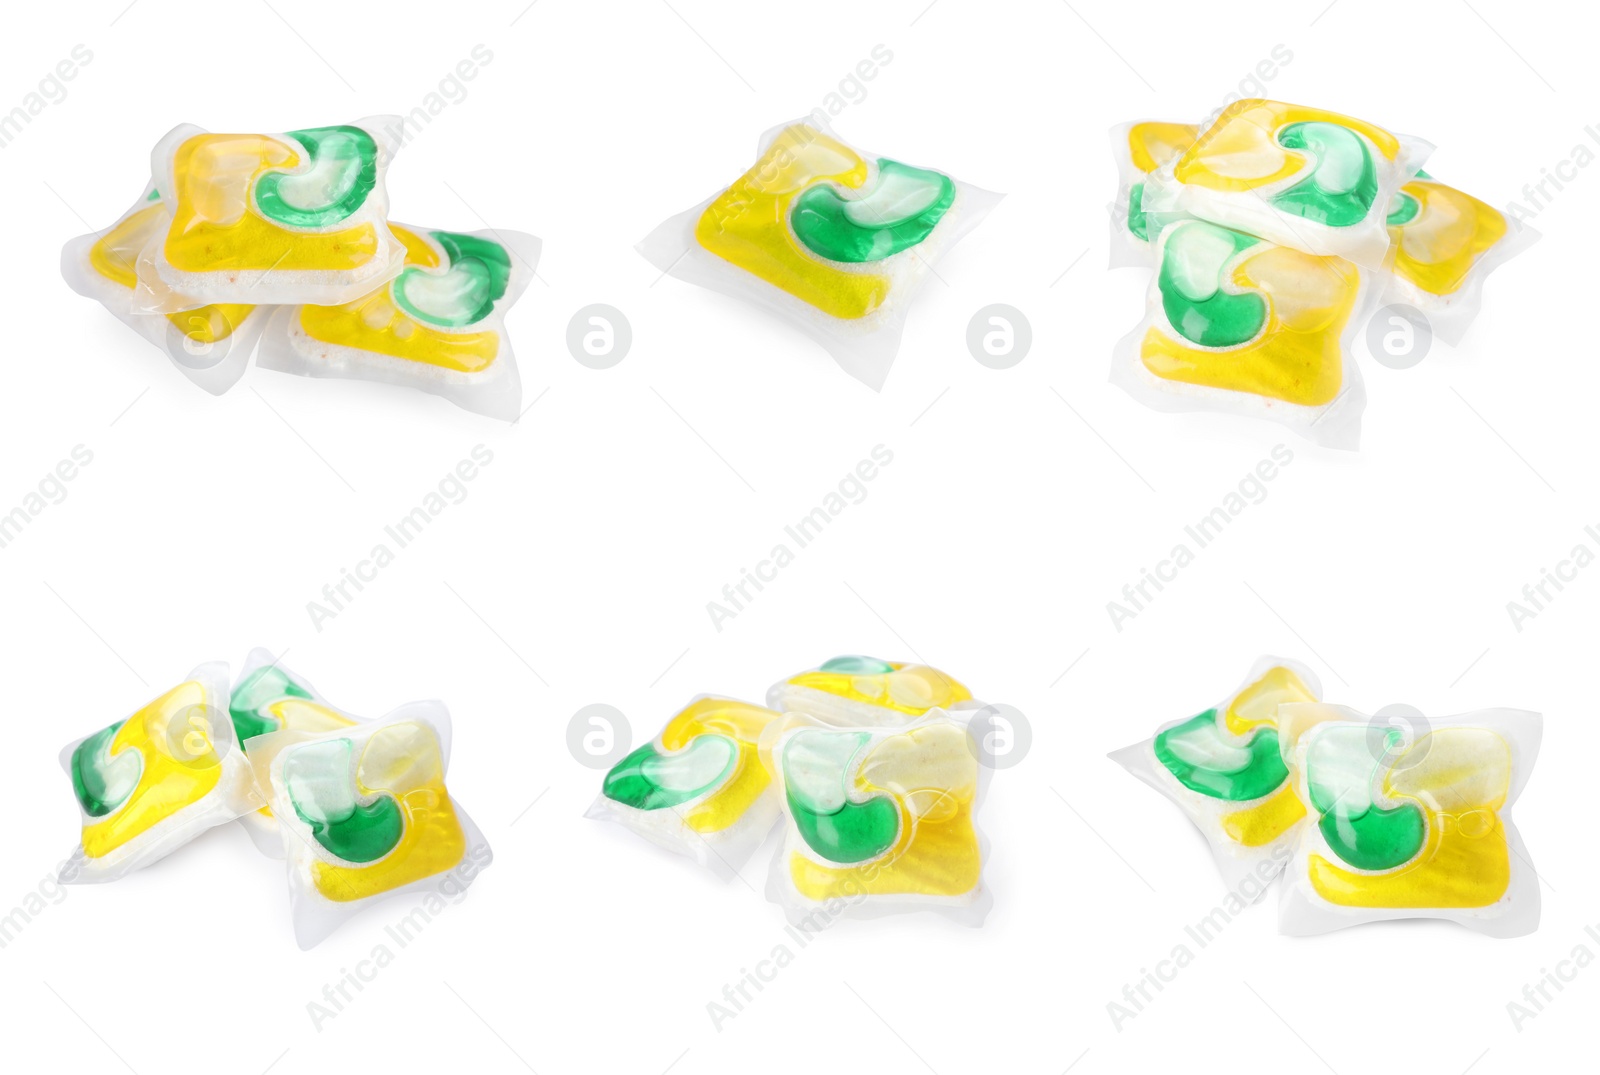 Image of Set with dishwasher detergent gel capsules on white background